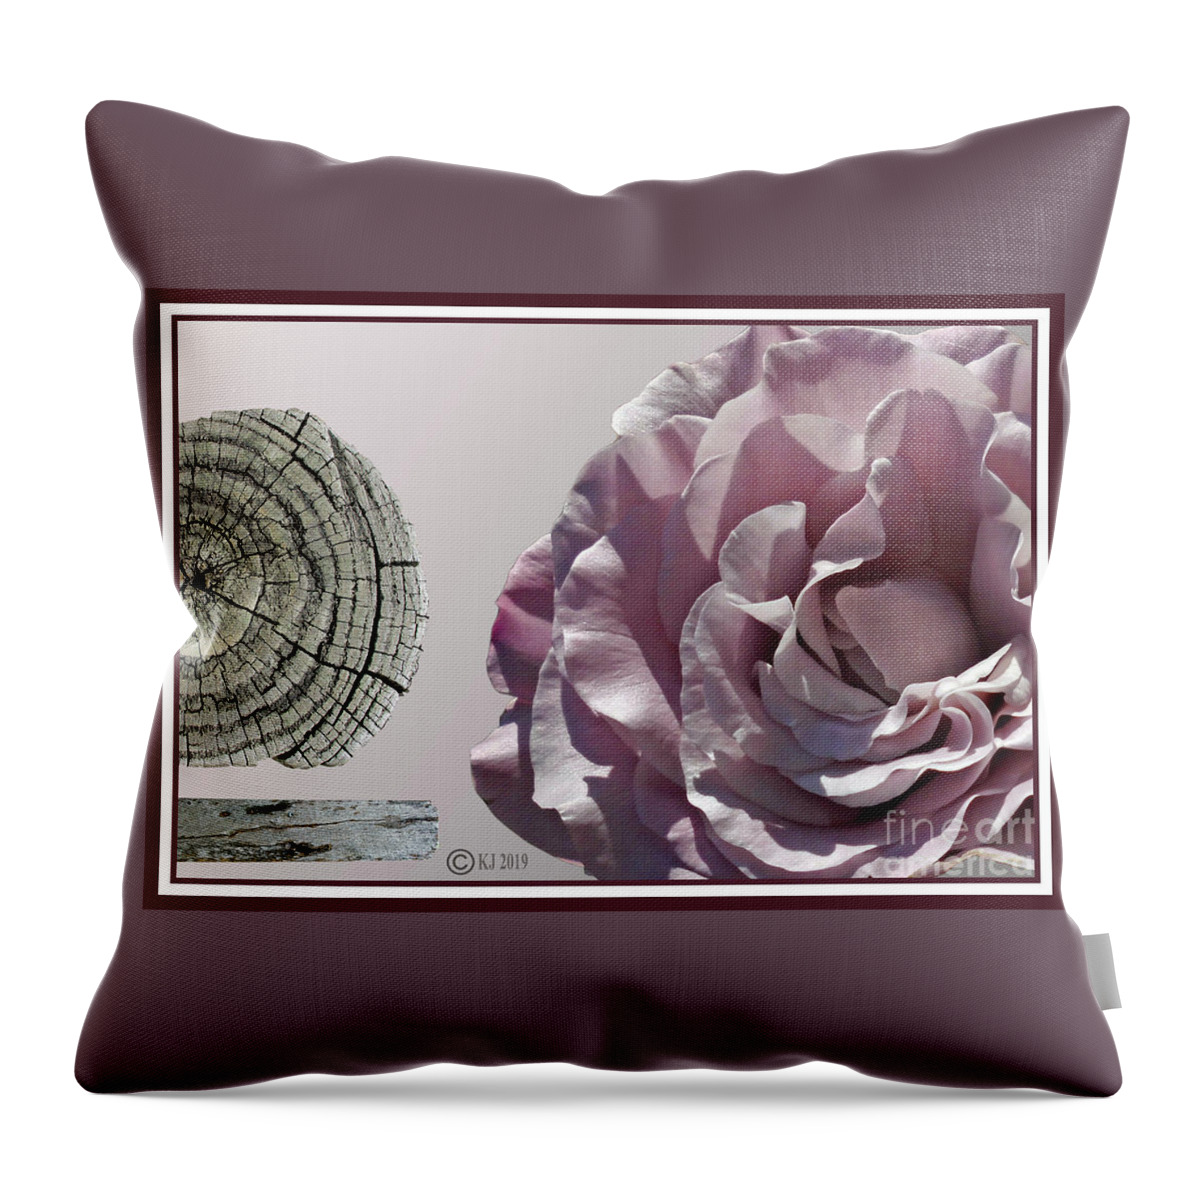 Wall Art Throw Pillow featuring the digital art Straight and Curly by Klaus Jaritz